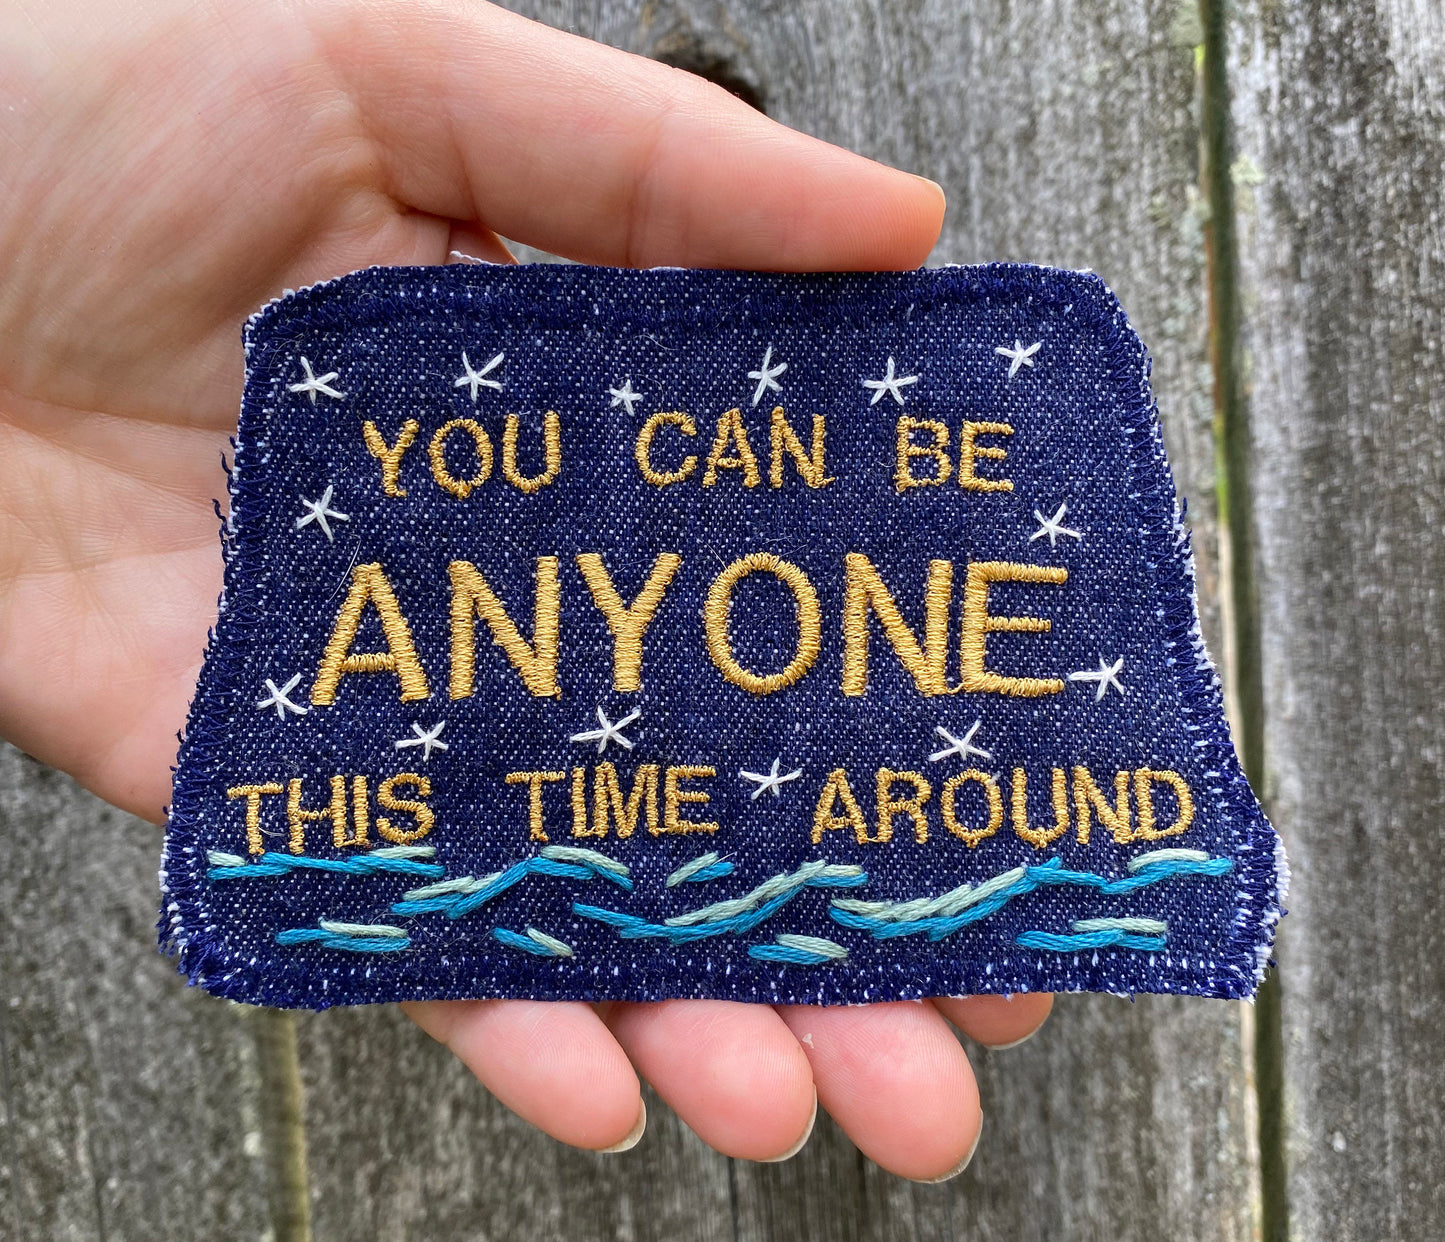 Timothy Leary Quote. Handmade Embroidered Upcycled Denim Patch. One of a kind